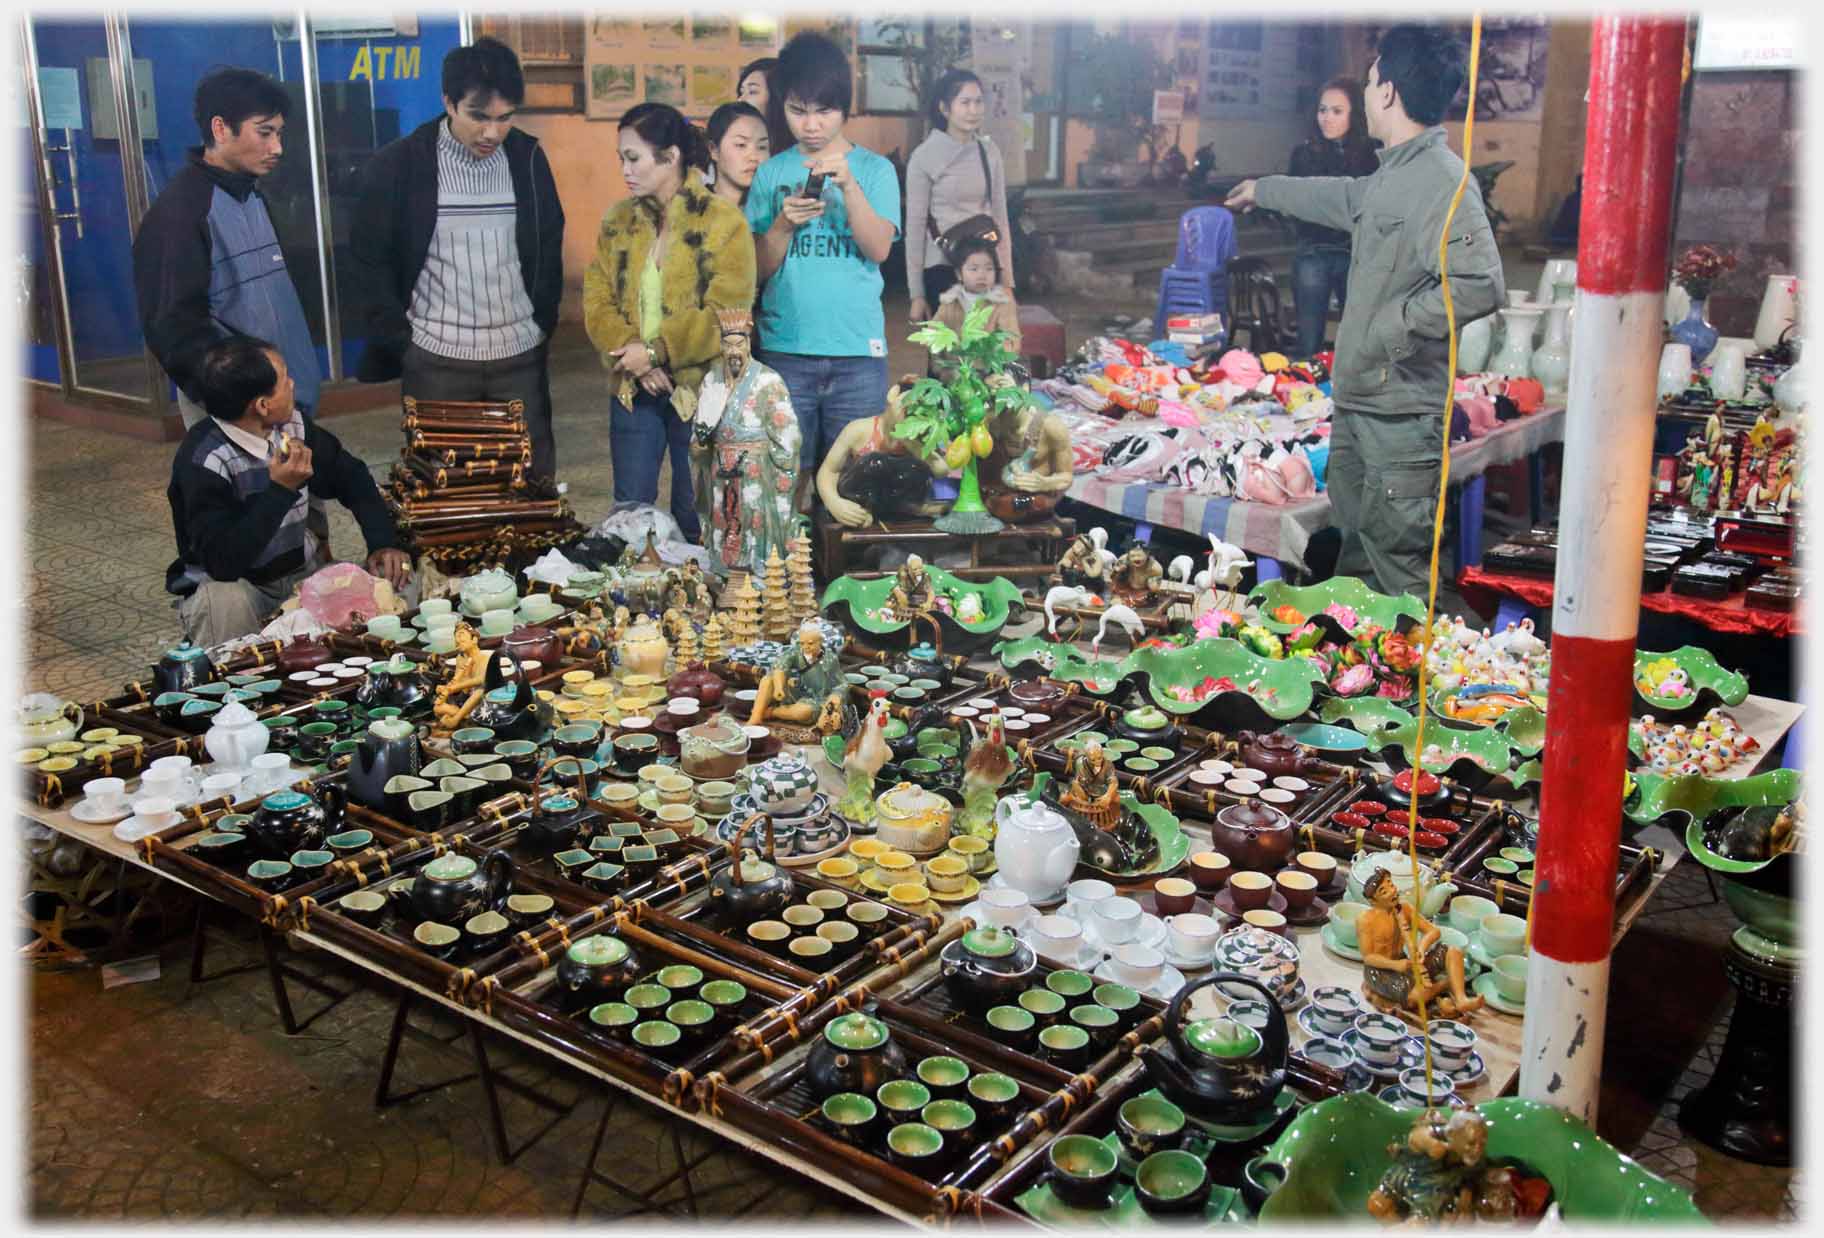 Customers beyond a stall covered with small ceramic items.